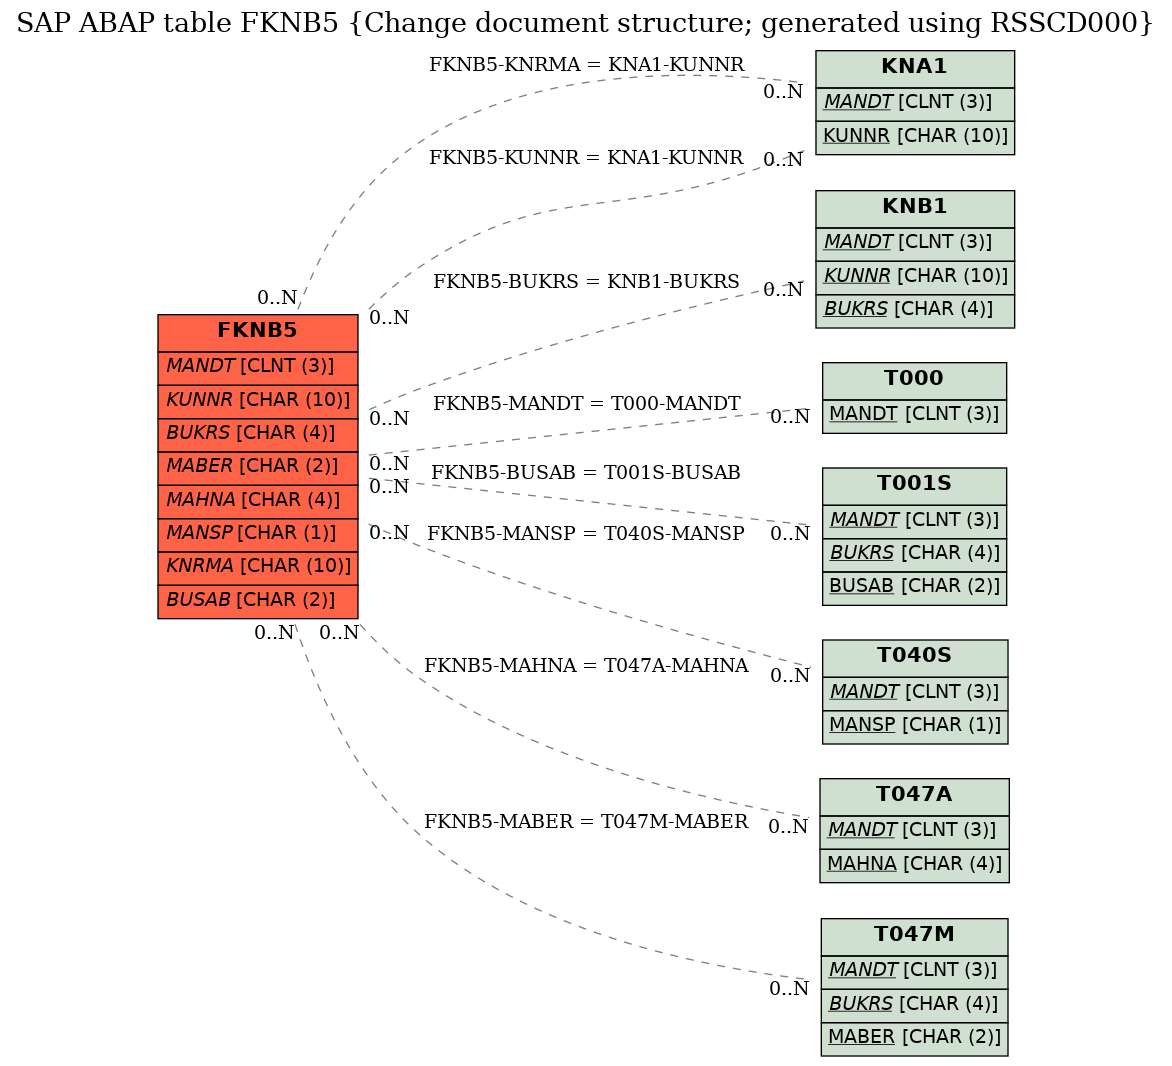 E-R Diagram for table FKNB5 (Change document structure; generated using RSSCD000)